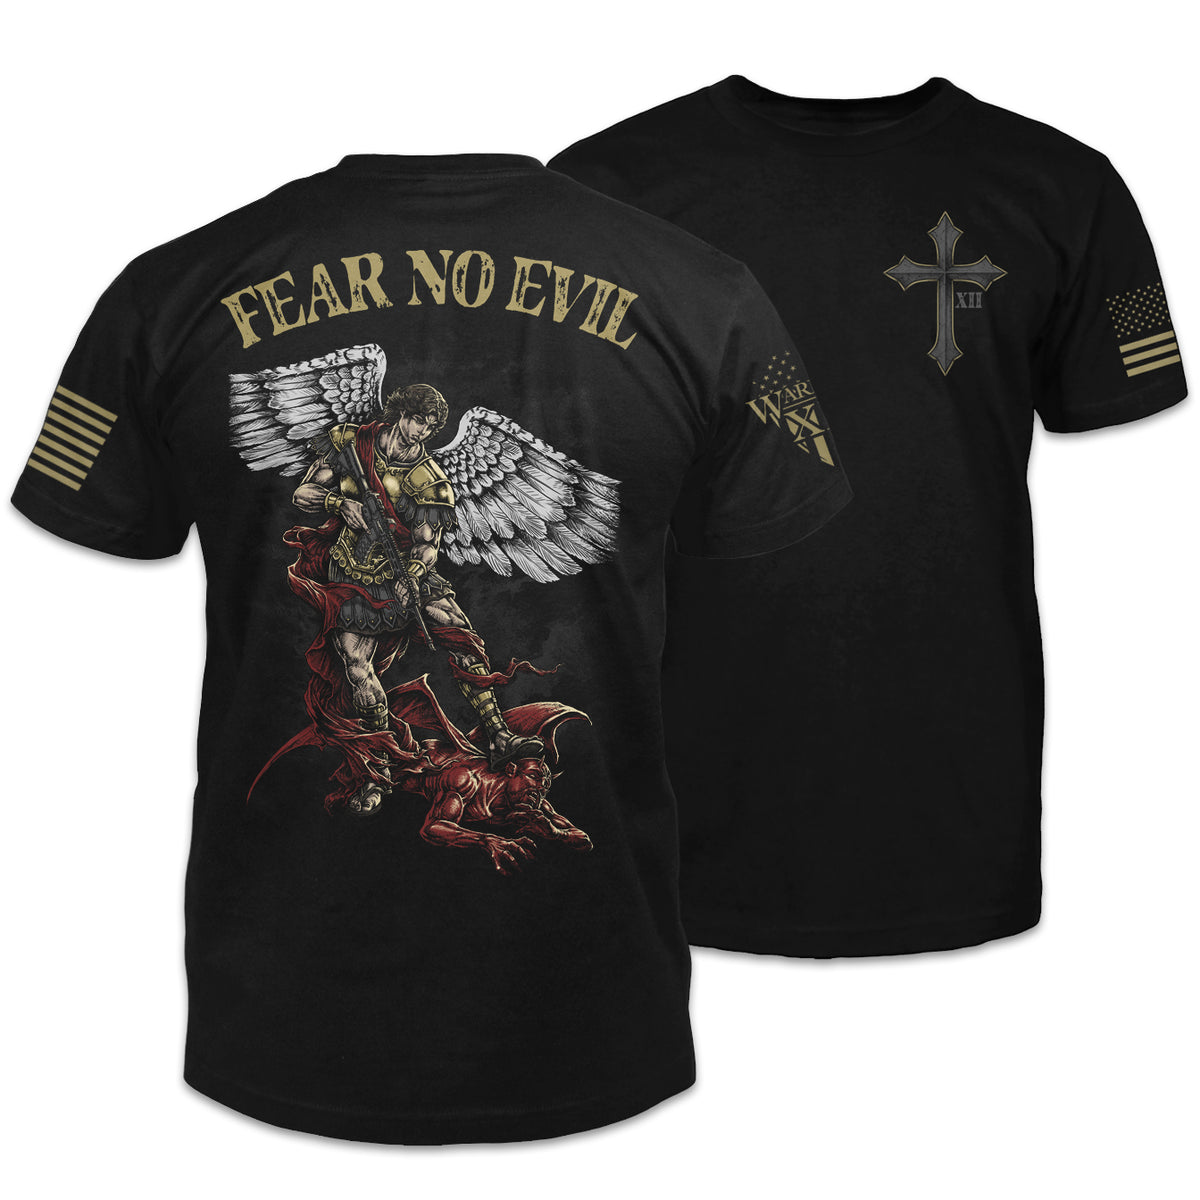 Front & back black t-shirt with the words "fear no evil" with a Saint Michael the Archangel holding a gun with his foot on Satan printed on the shirt.